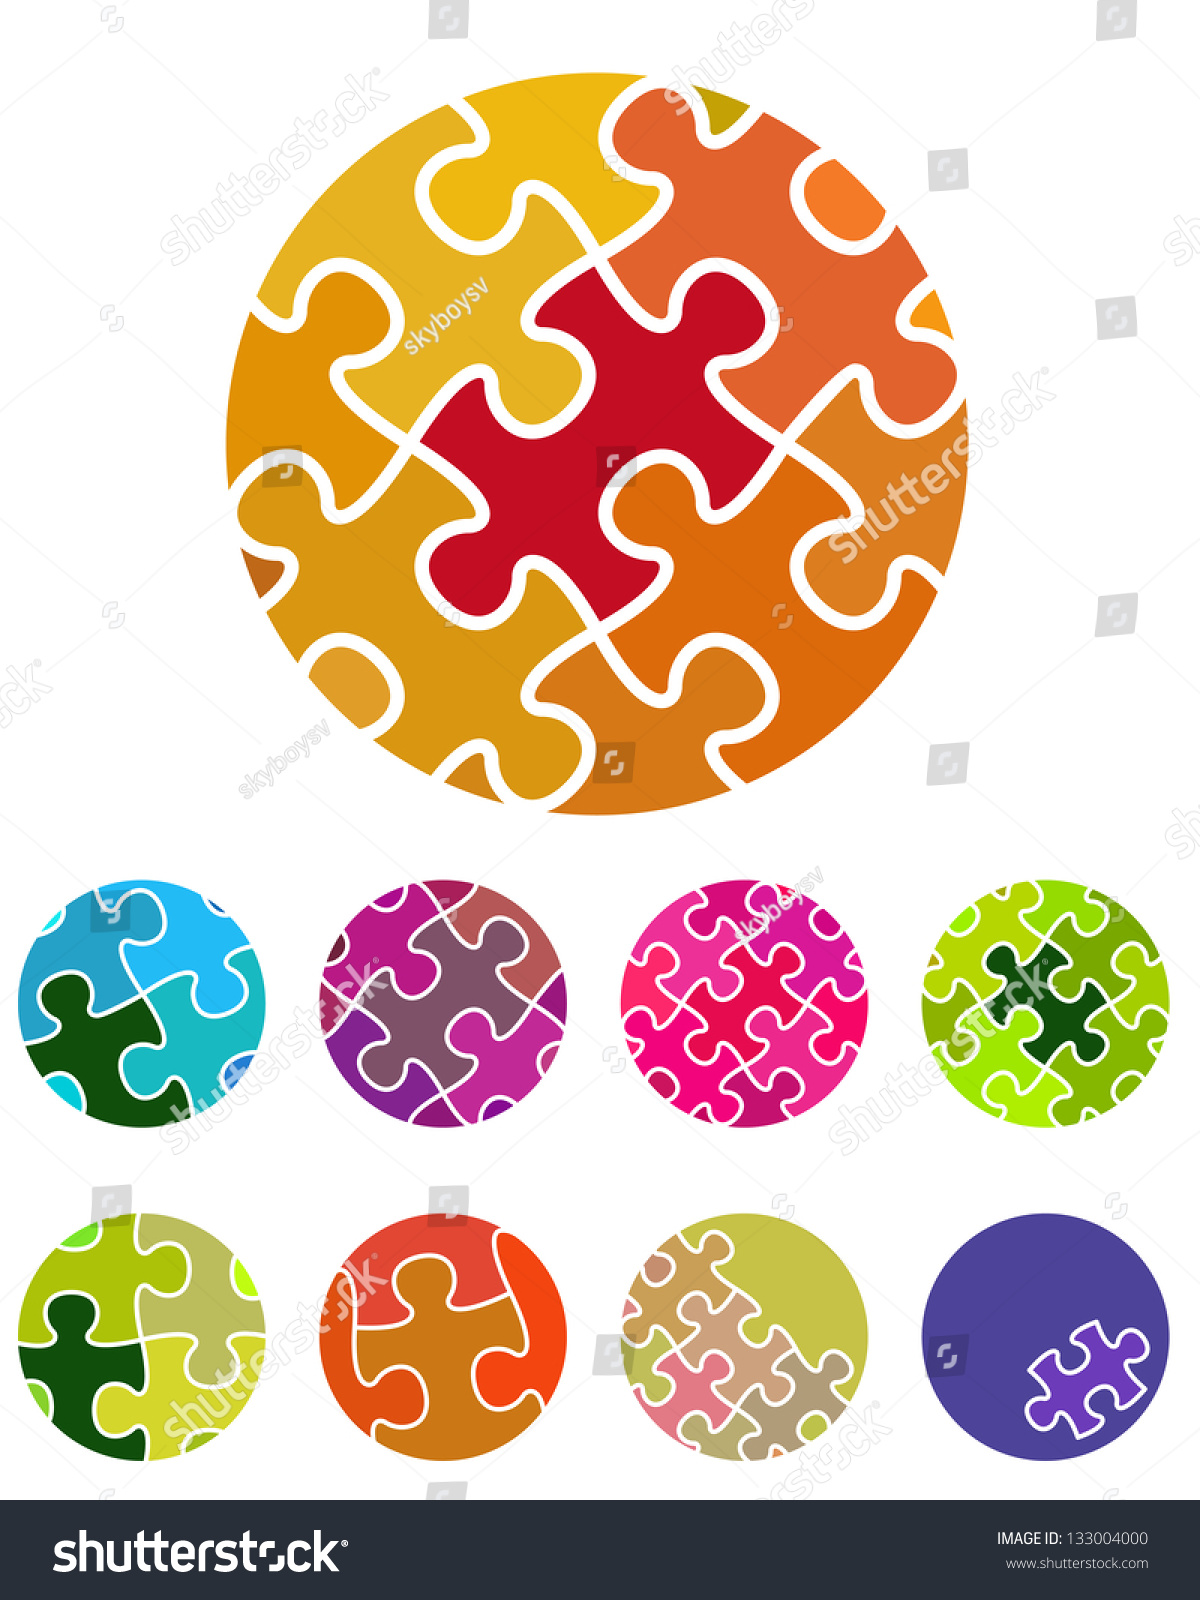 SVG of Design vector  jigsaw circular logo element. Colorful abstract pattern, icon set. You can use in the social media, mobile, community website and other commercial image. svg